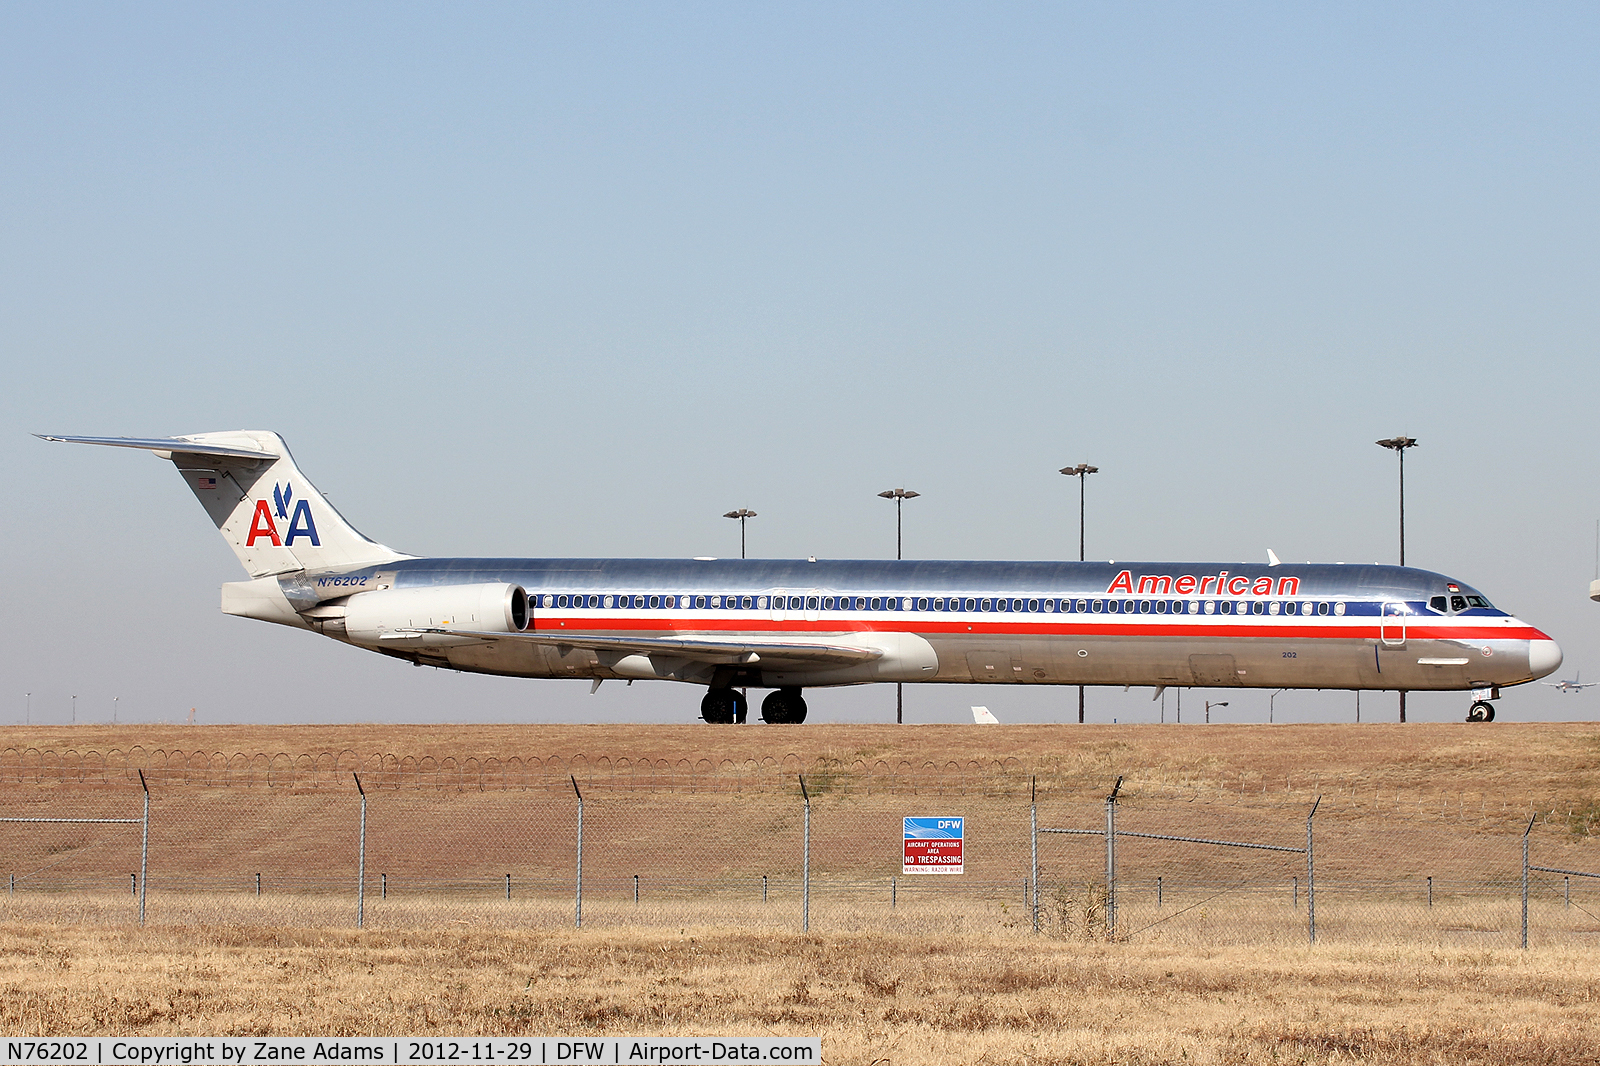 N76202, 1992 McDonnell Douglas MD-83 (DC-9-83) C/N 53292, American Airlines at DFW Airport